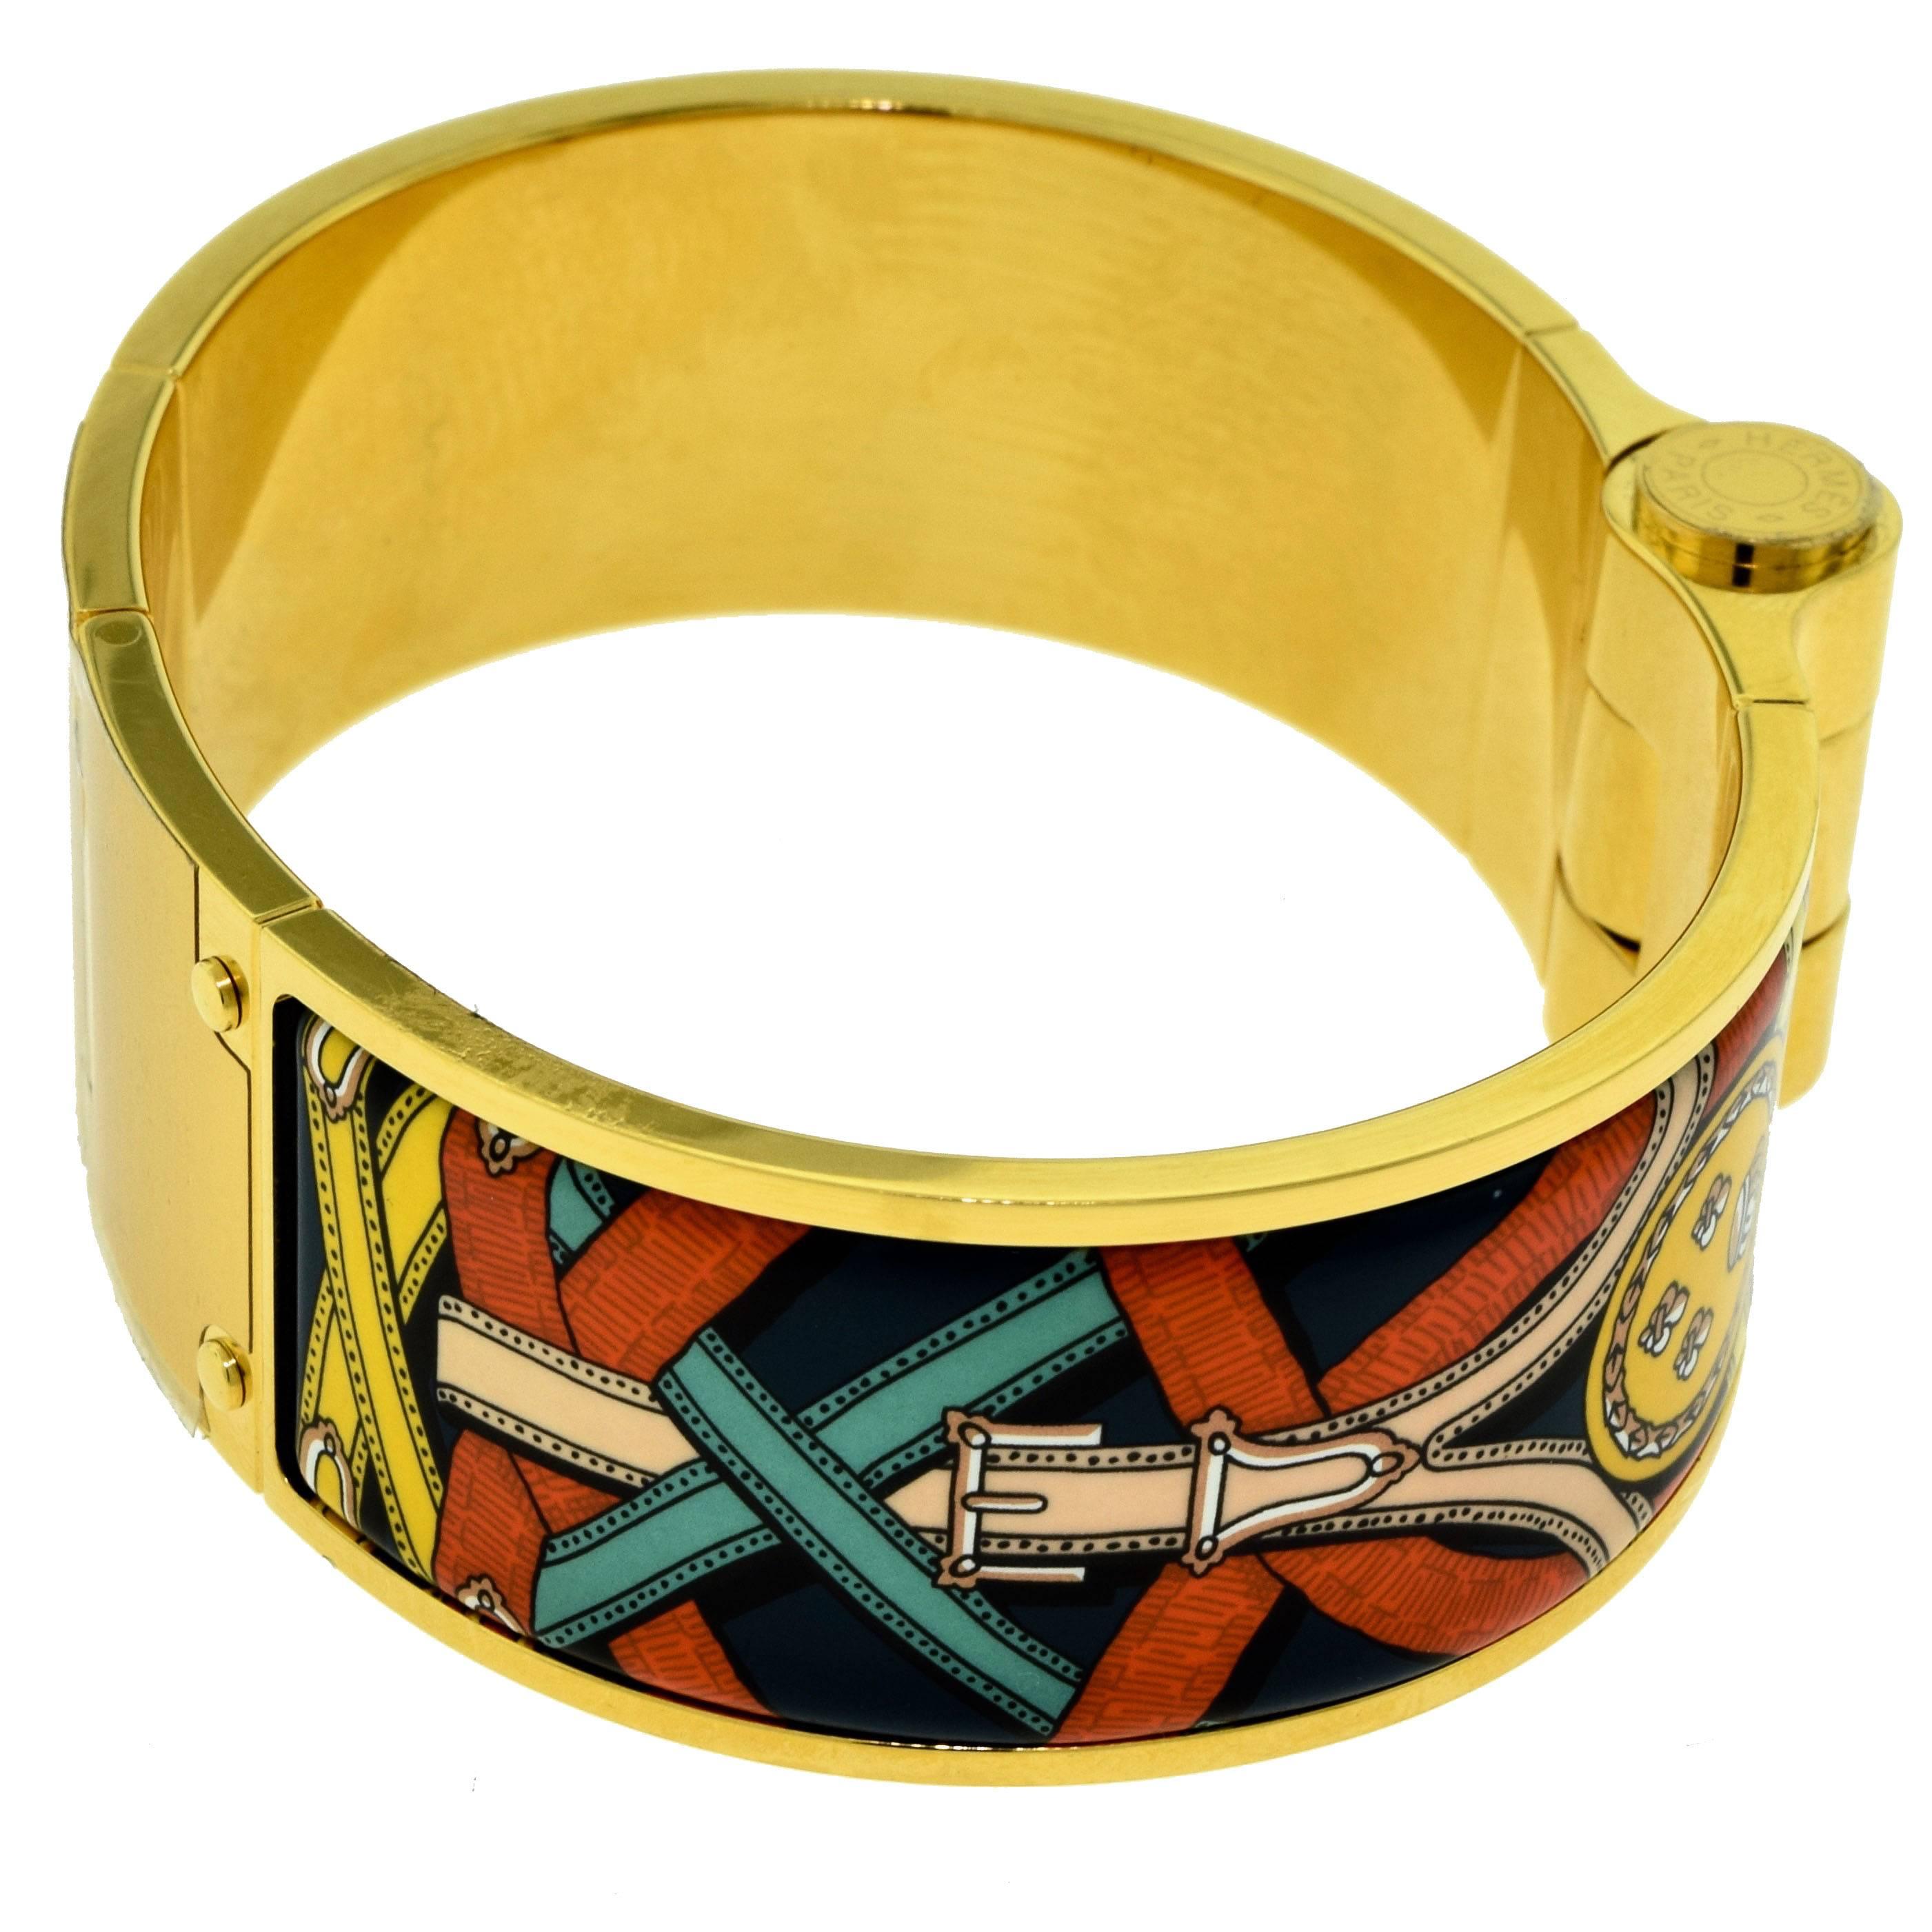 Designer: Hermes
Model: Cavalcadour à Cheval
Type: Hermes wide hinged bracelet
Size: Small
Metal: Yellow Gold
Metal Purity: 18k
Non-Metal Material: Enamel
Color: Futurisme
Total Item Weight (g): 77.3
Width Dimension: 1 inch
Retail: $660.00
